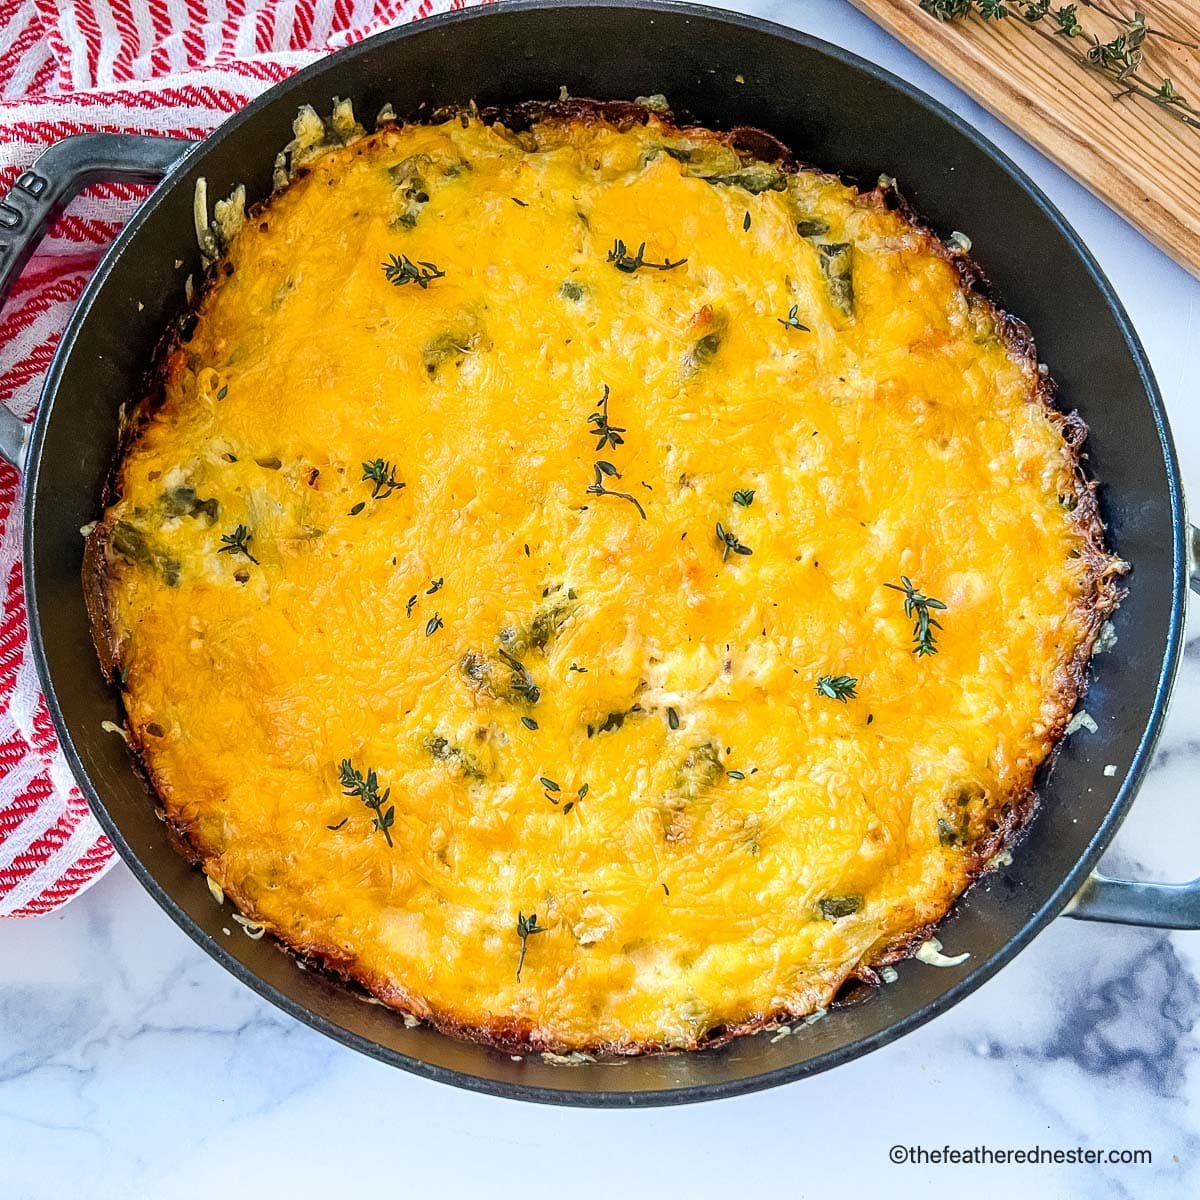 a skillet of hash brown casserole ready to serve.